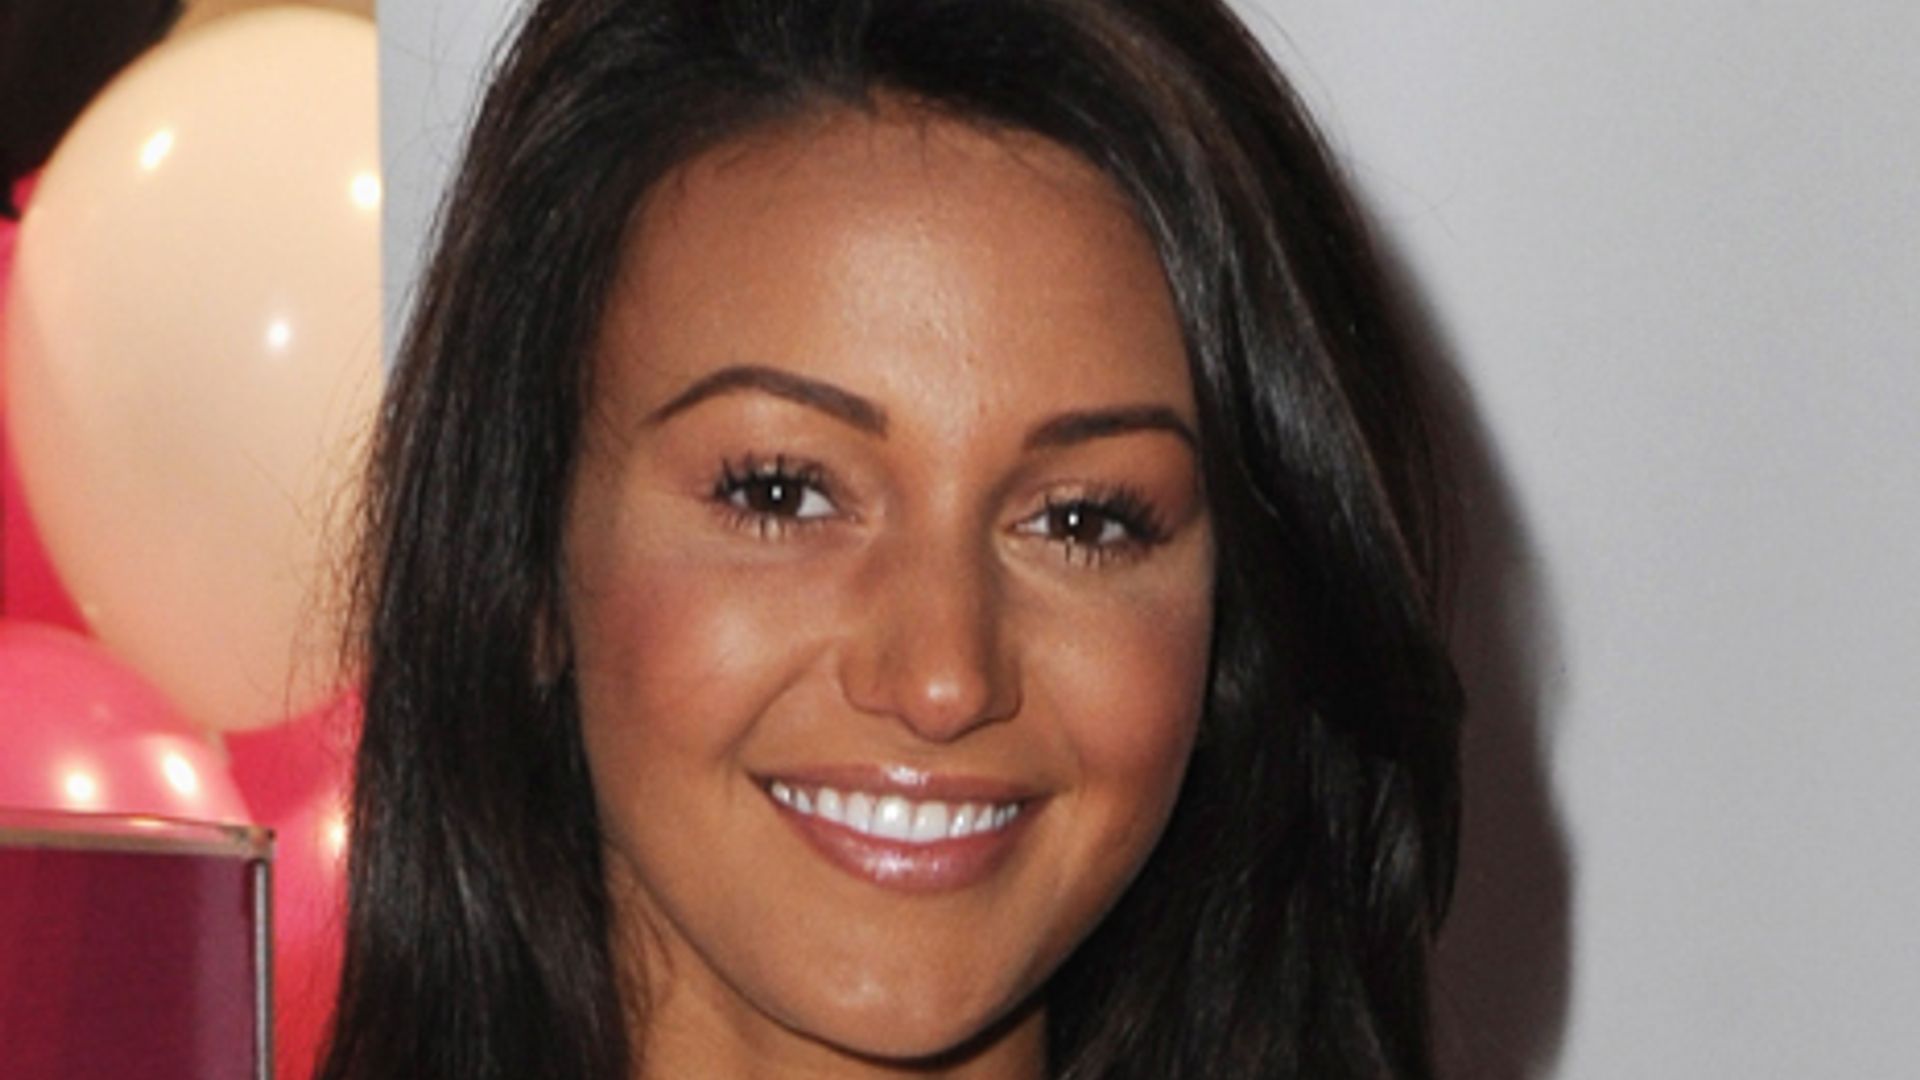 Michelle Keegan resizing engagement ring from Mark Wright